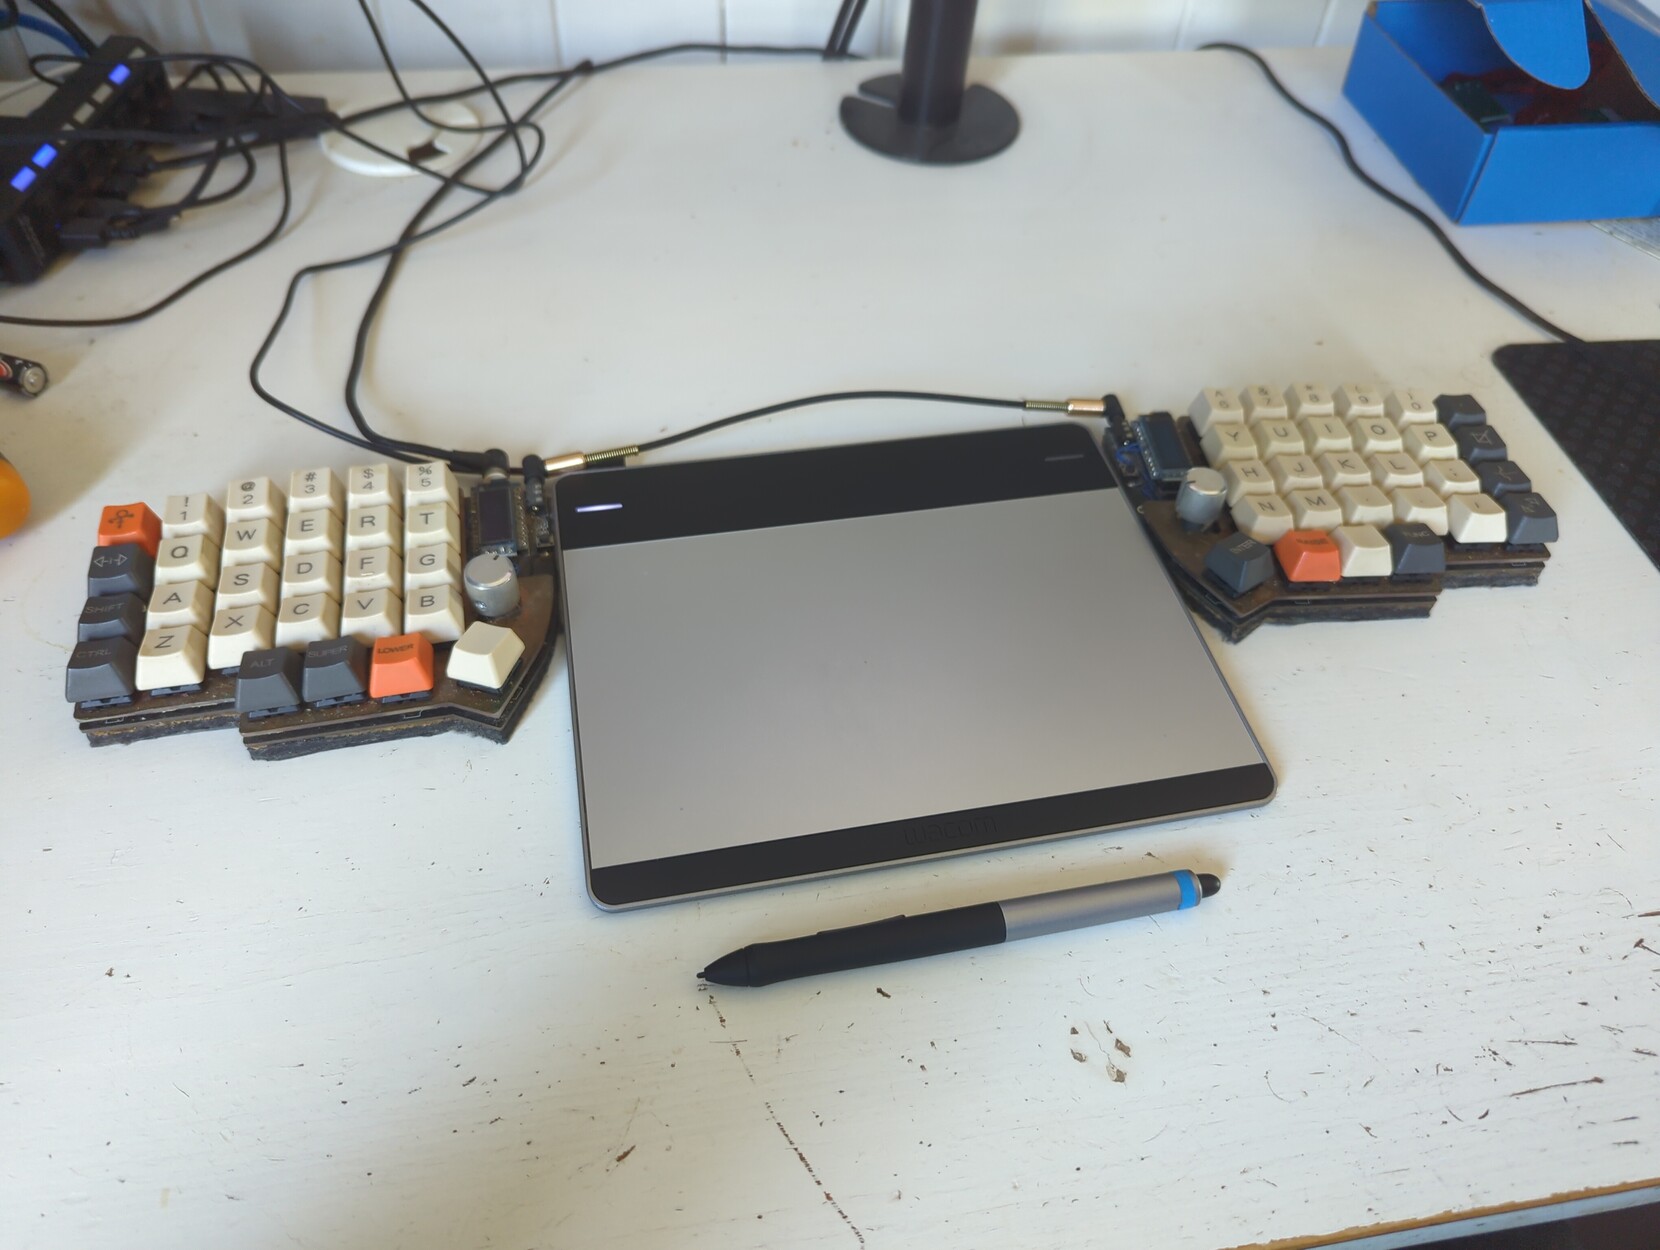 A drawing tablet between two halves of a split keyboard